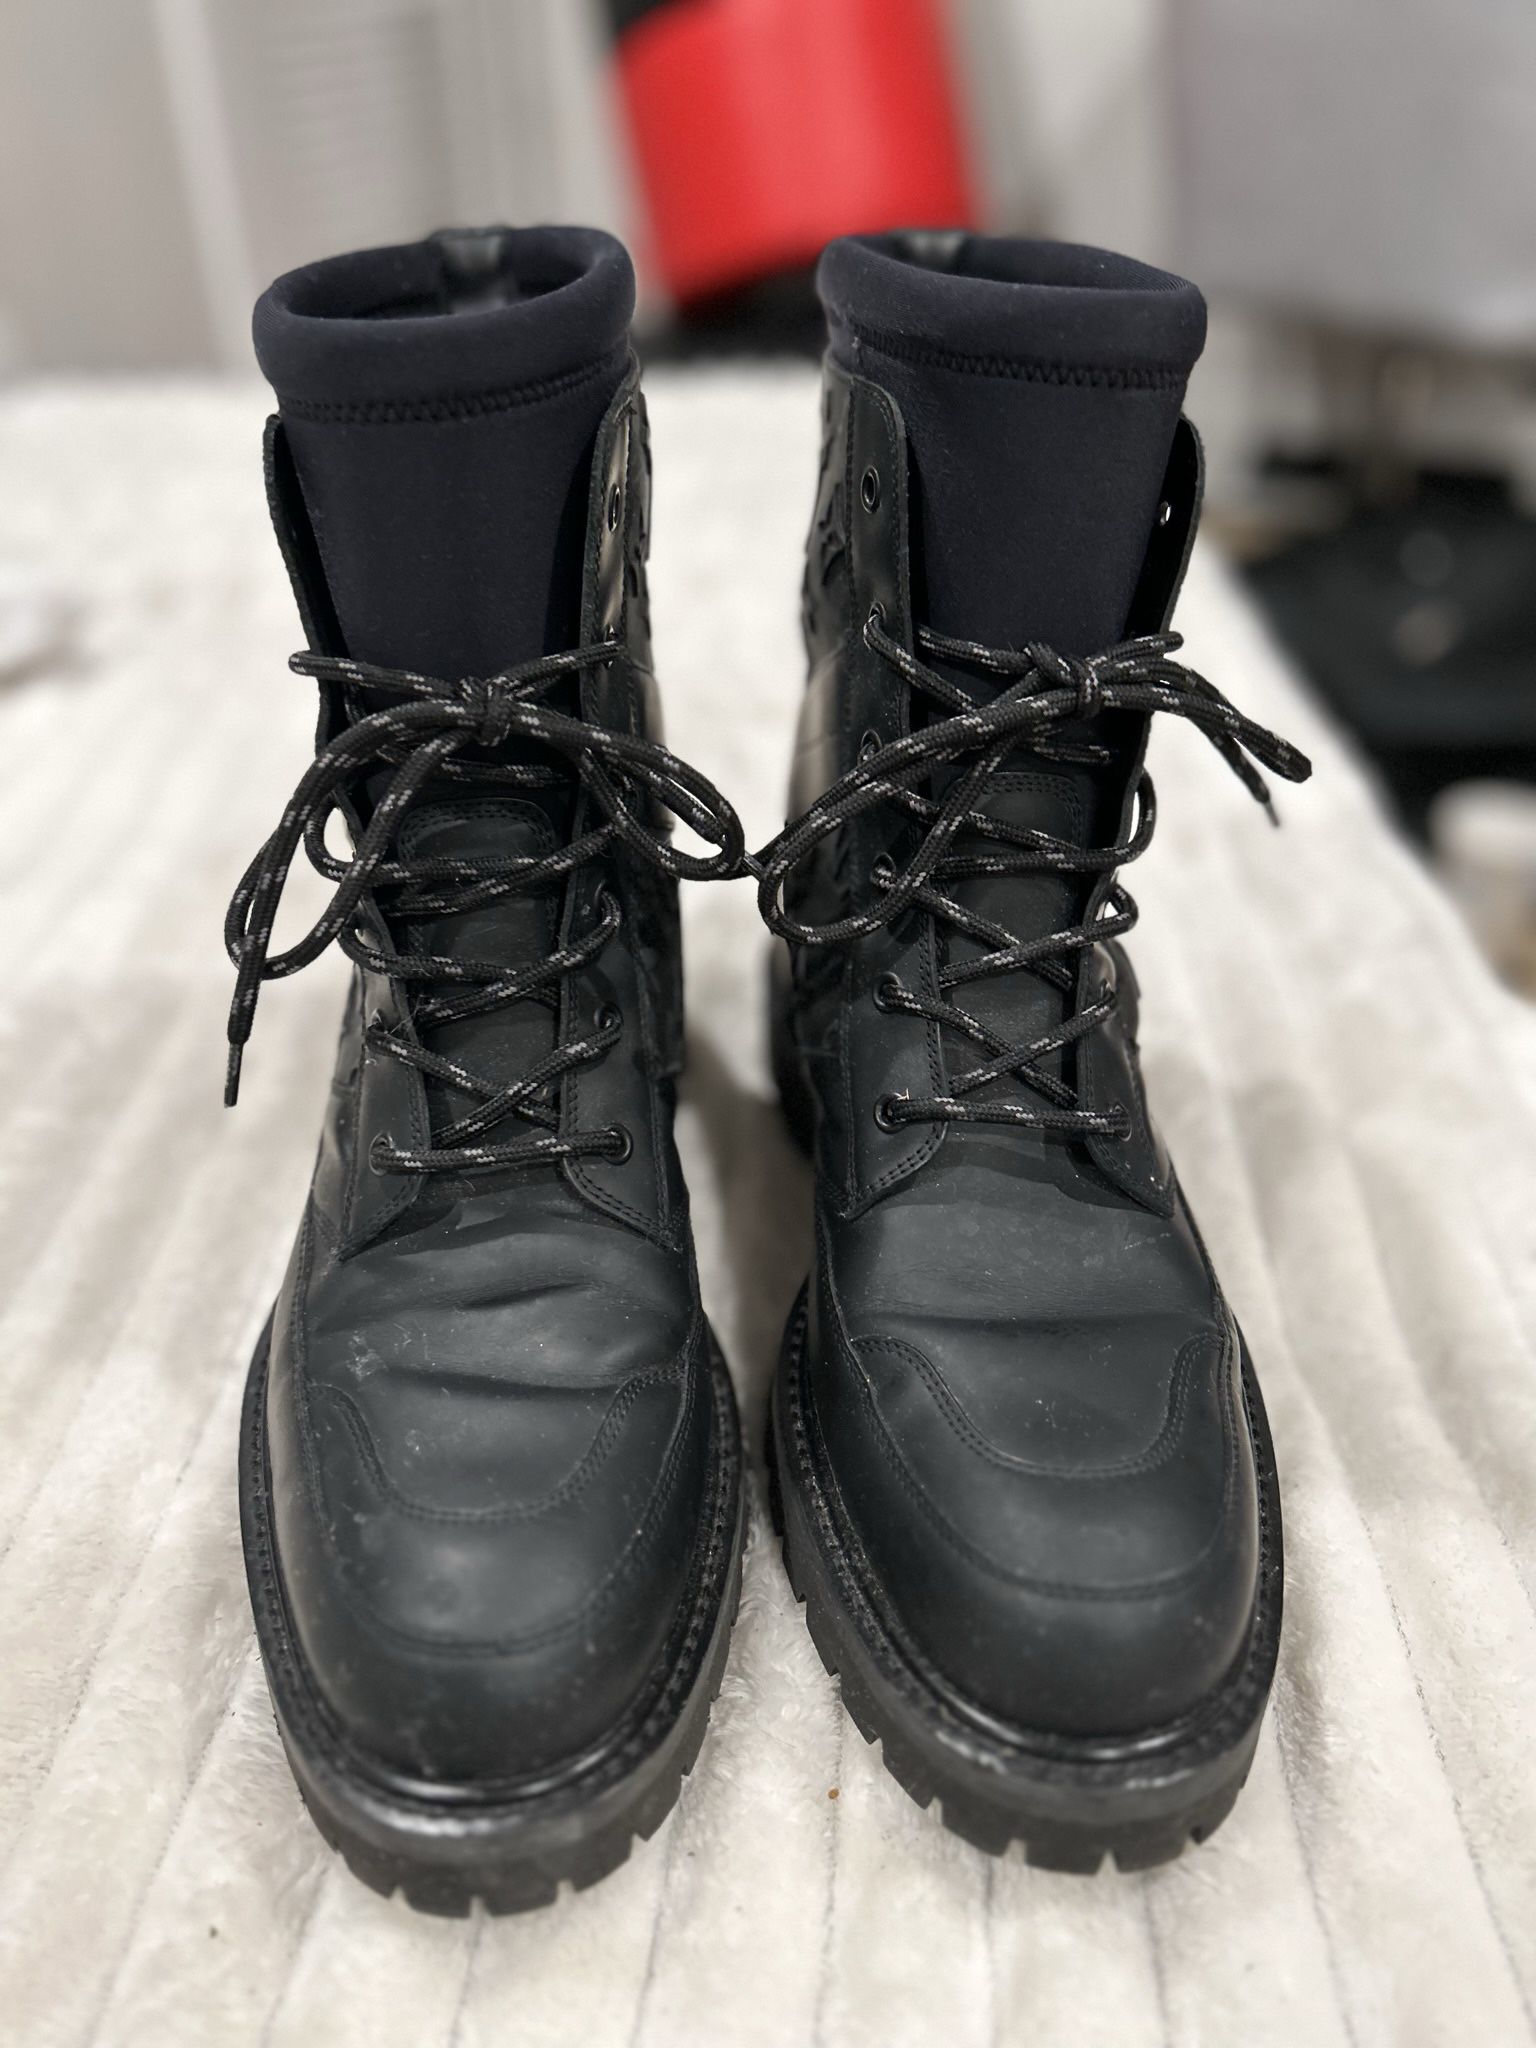 Louis Vuitton boots for Sale in Philadelphia, PA - OfferUp